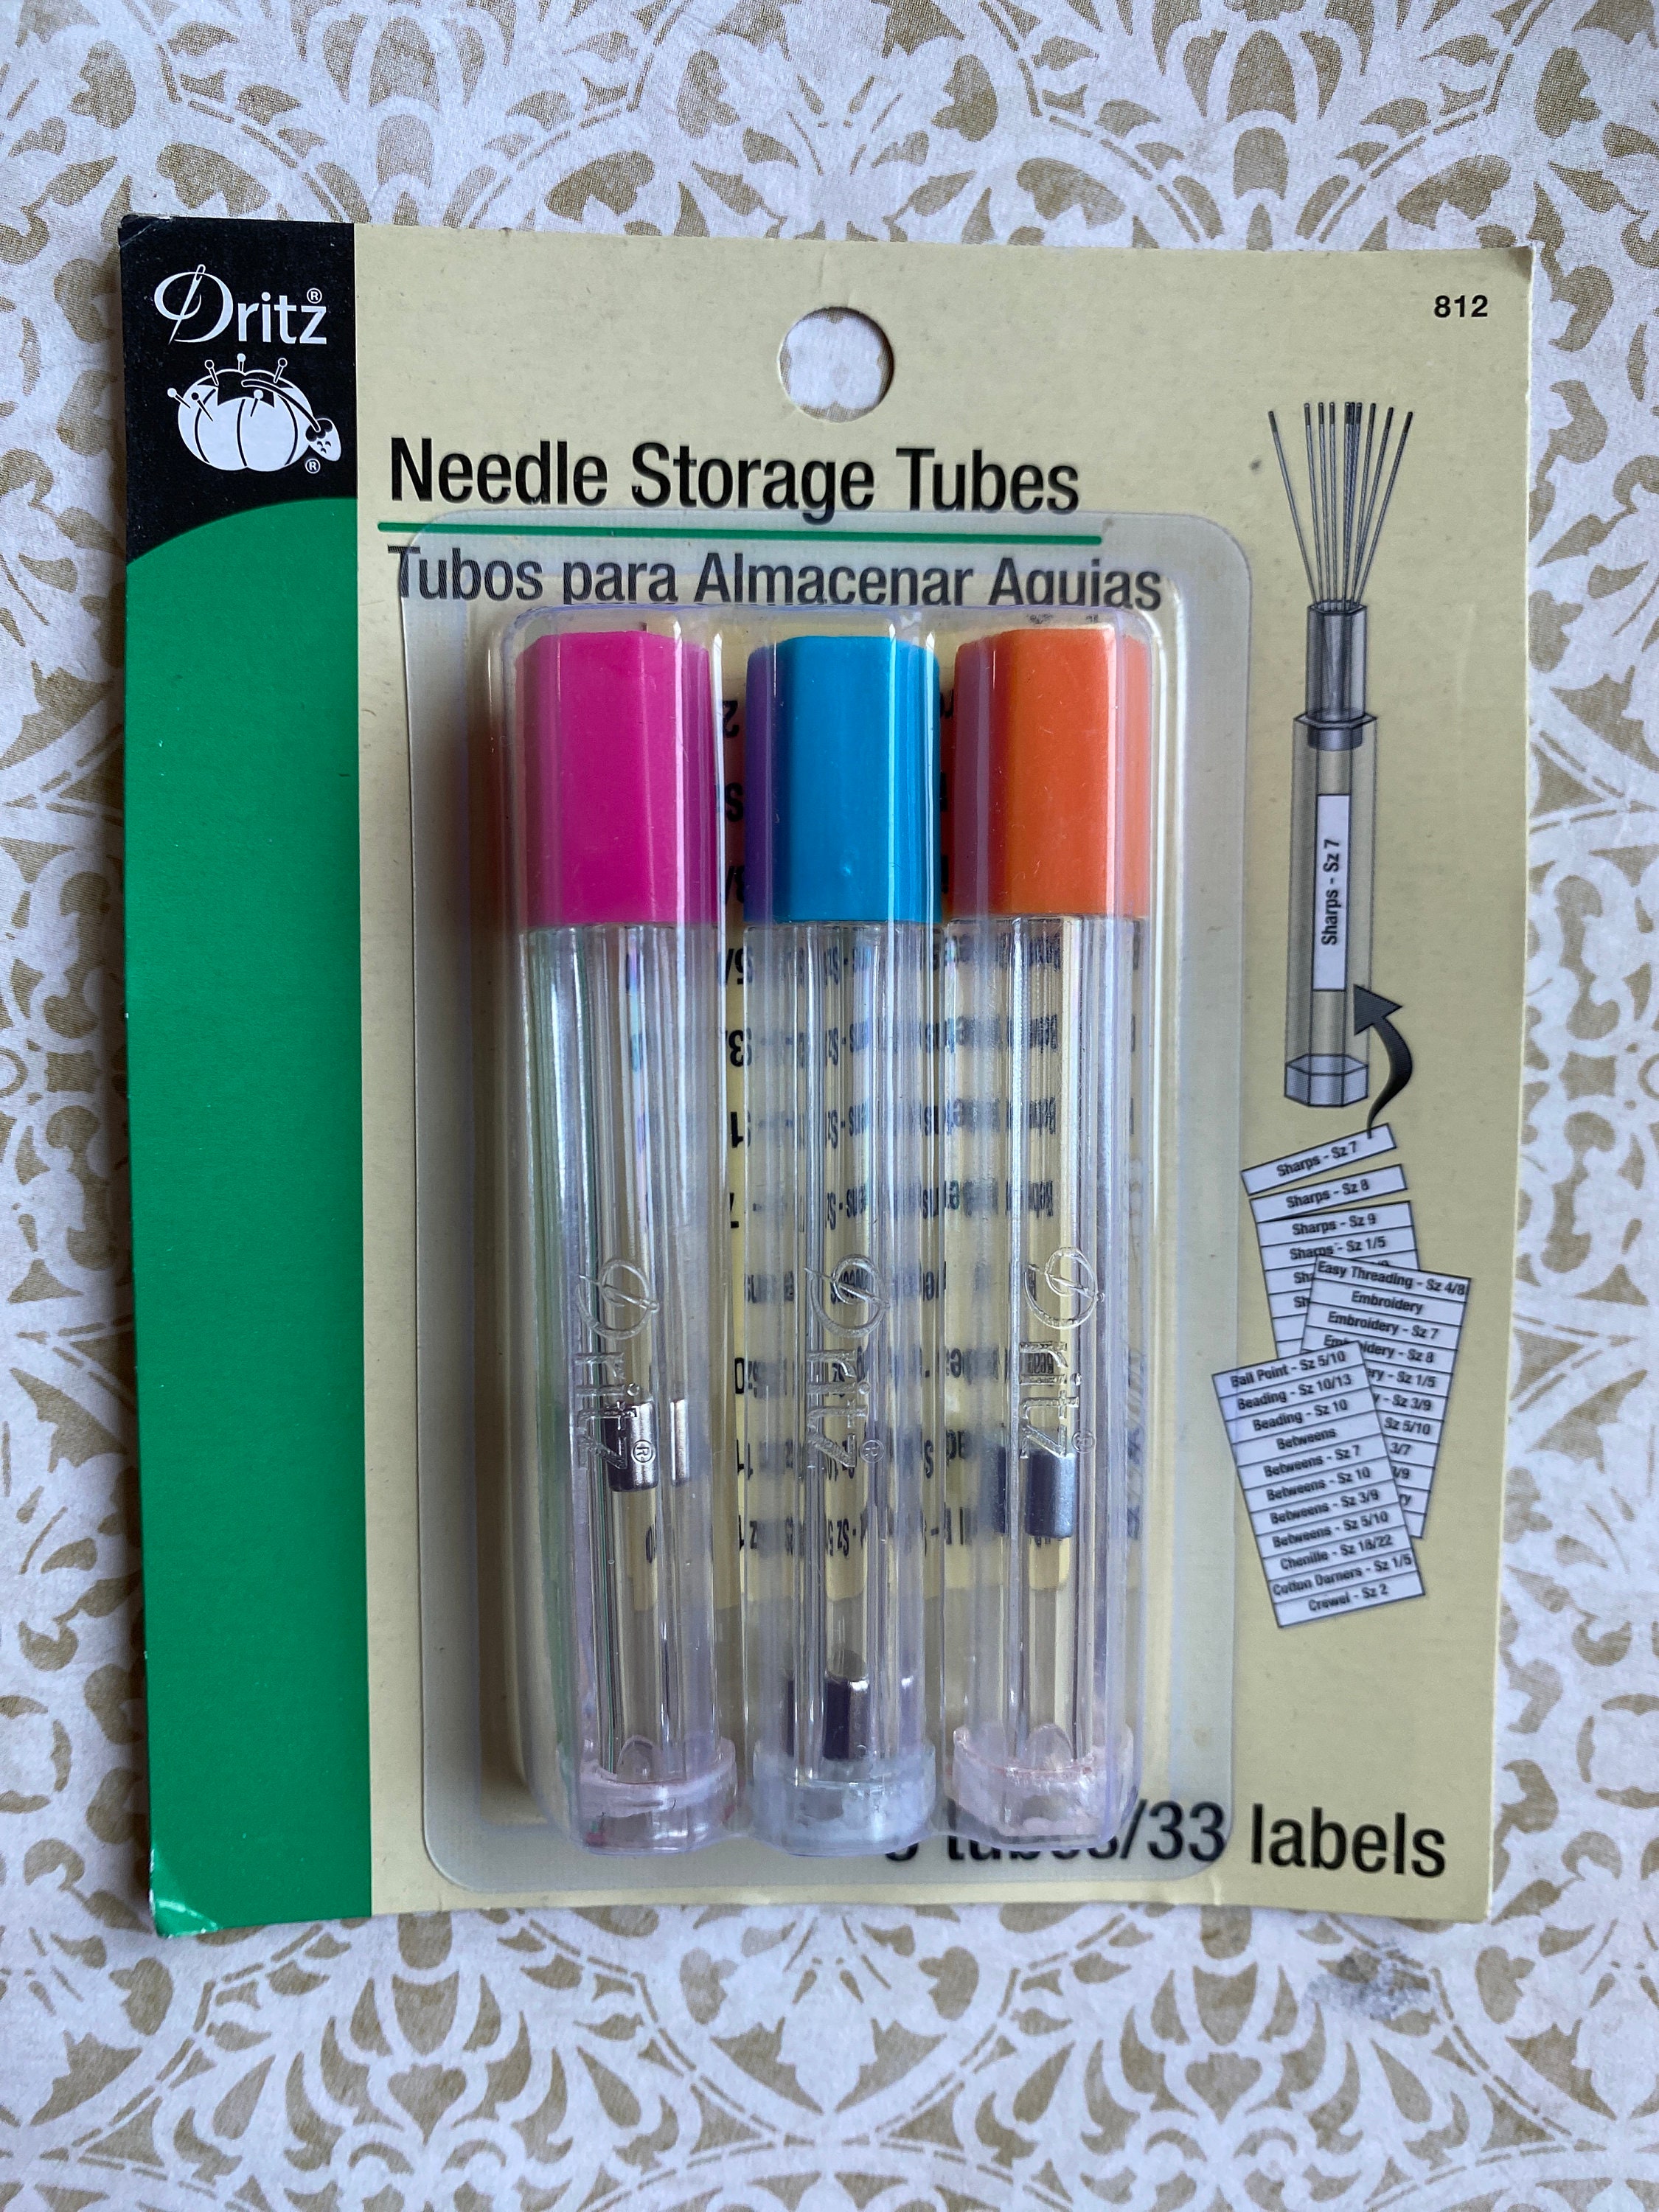 Dritz Needle Storage Tubes, Magnetic Tubes With Labels, Finally a